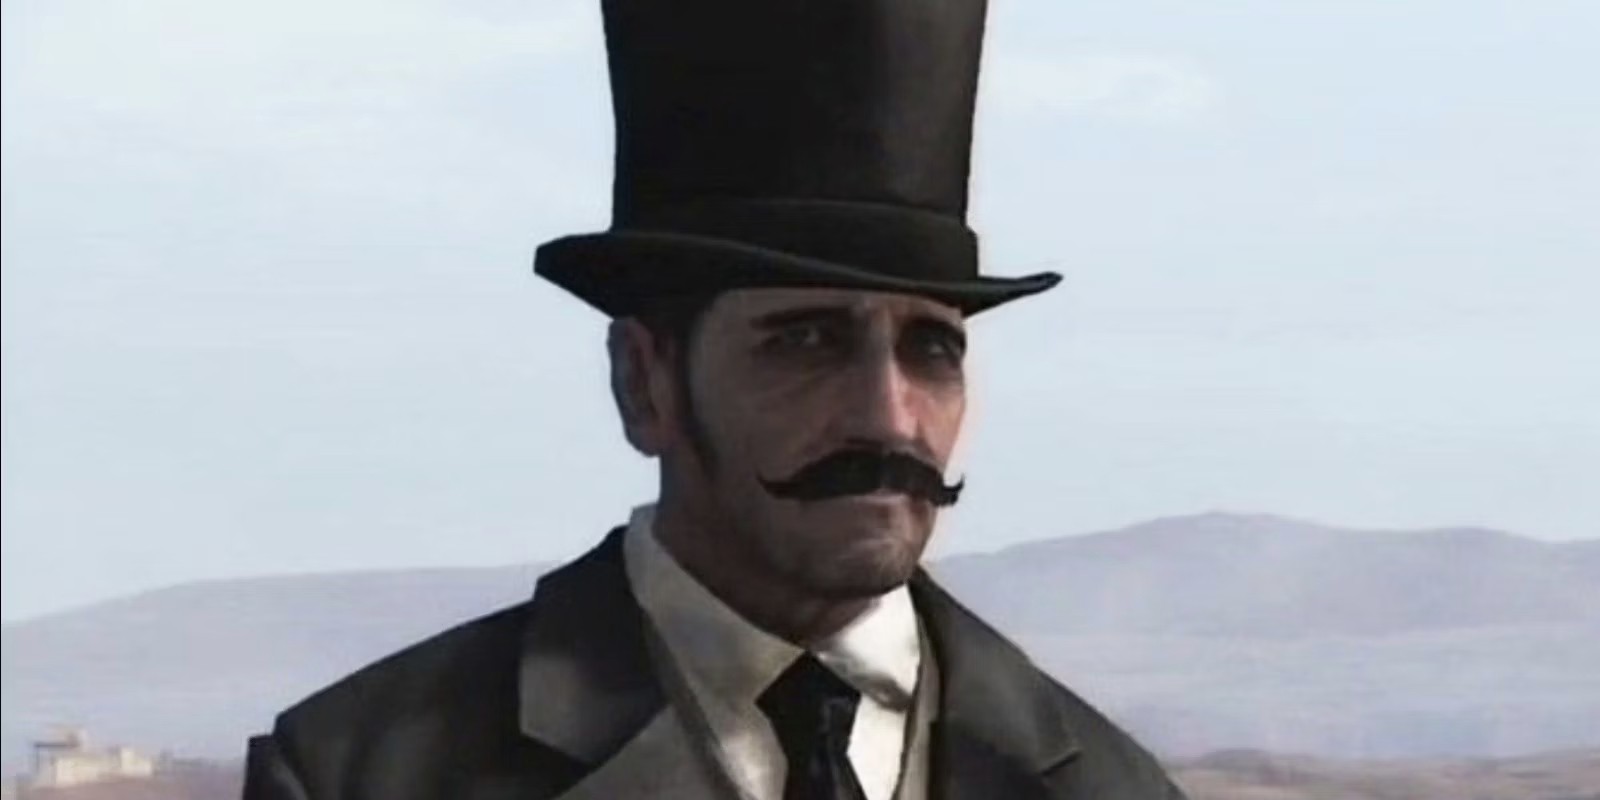 The Strange Man is an iconic RDR side character. Image credit: Rockstar